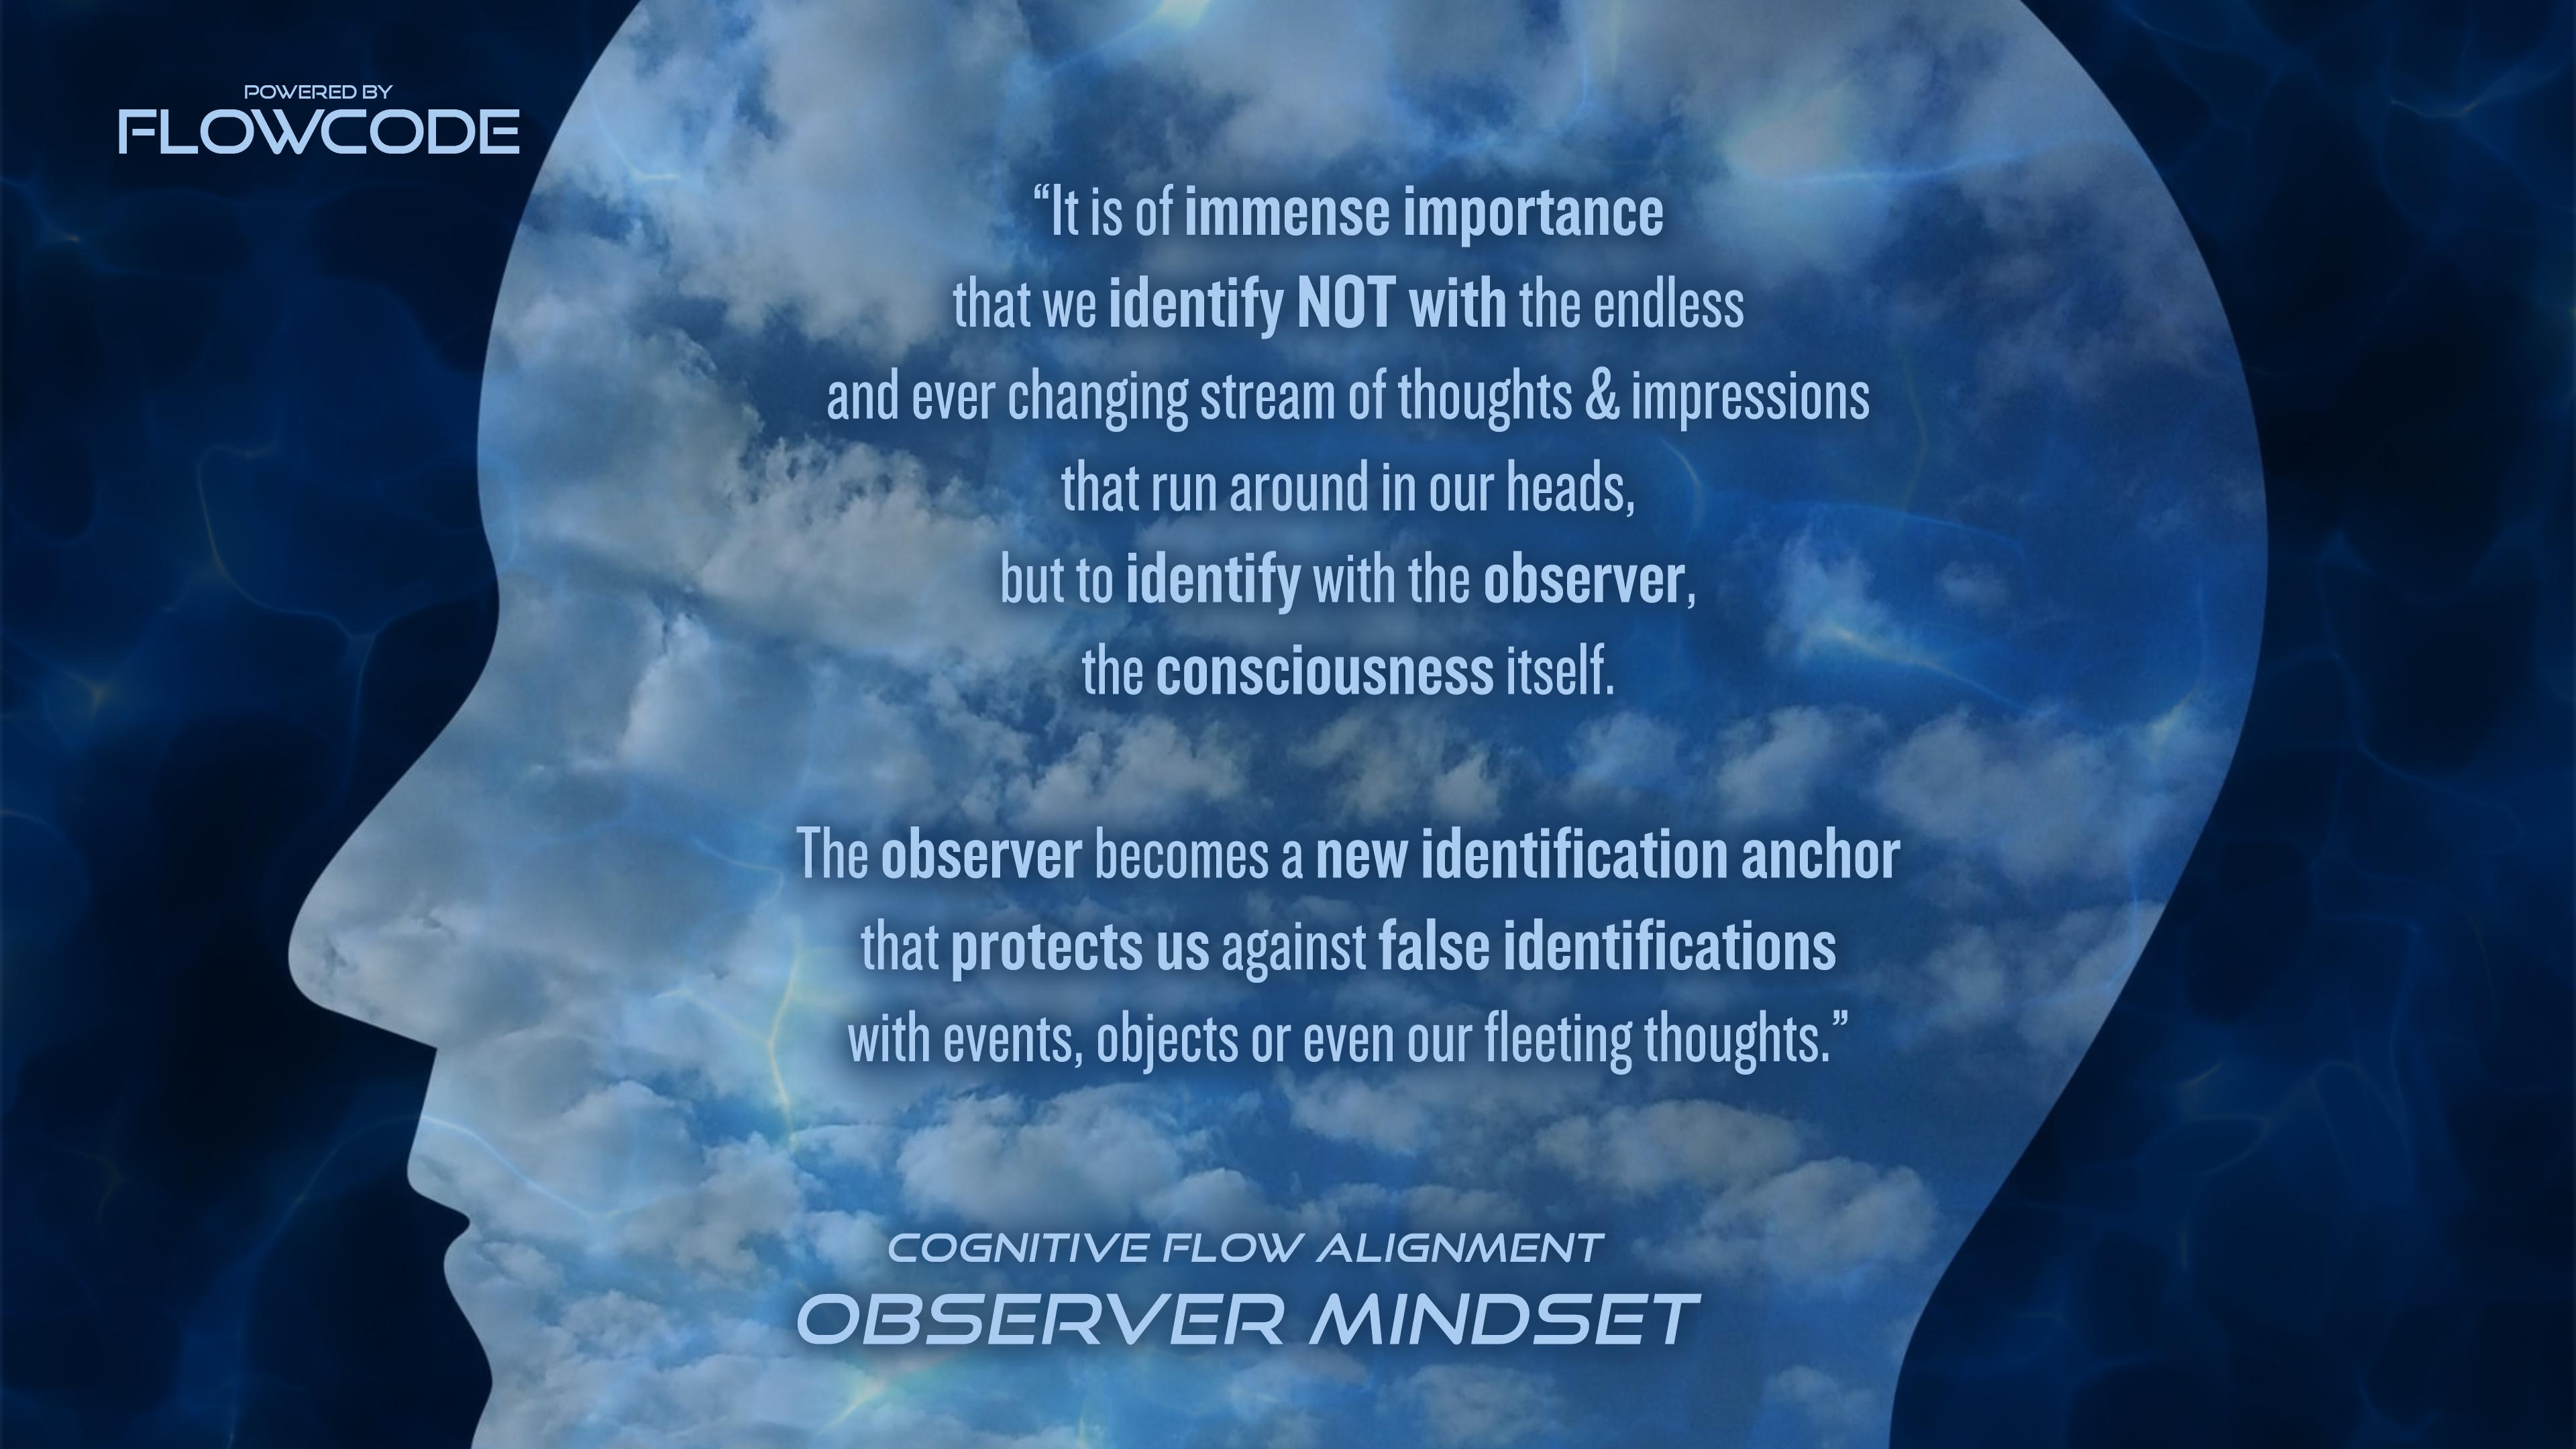 FlowCode - Observer mindset - The observer becomes a new identification anchor